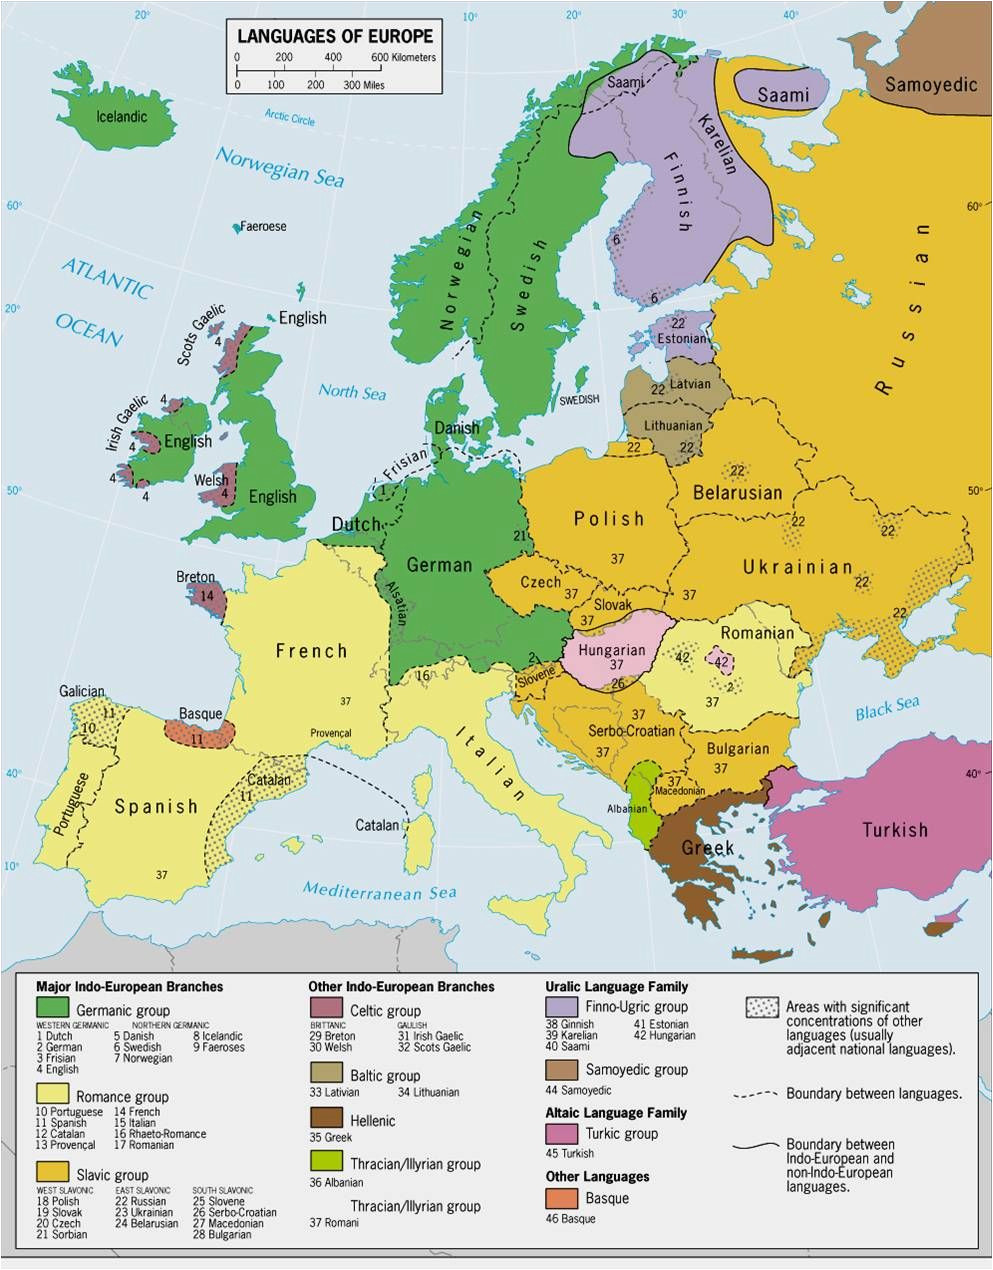 languages of europe classification by linguistic family source